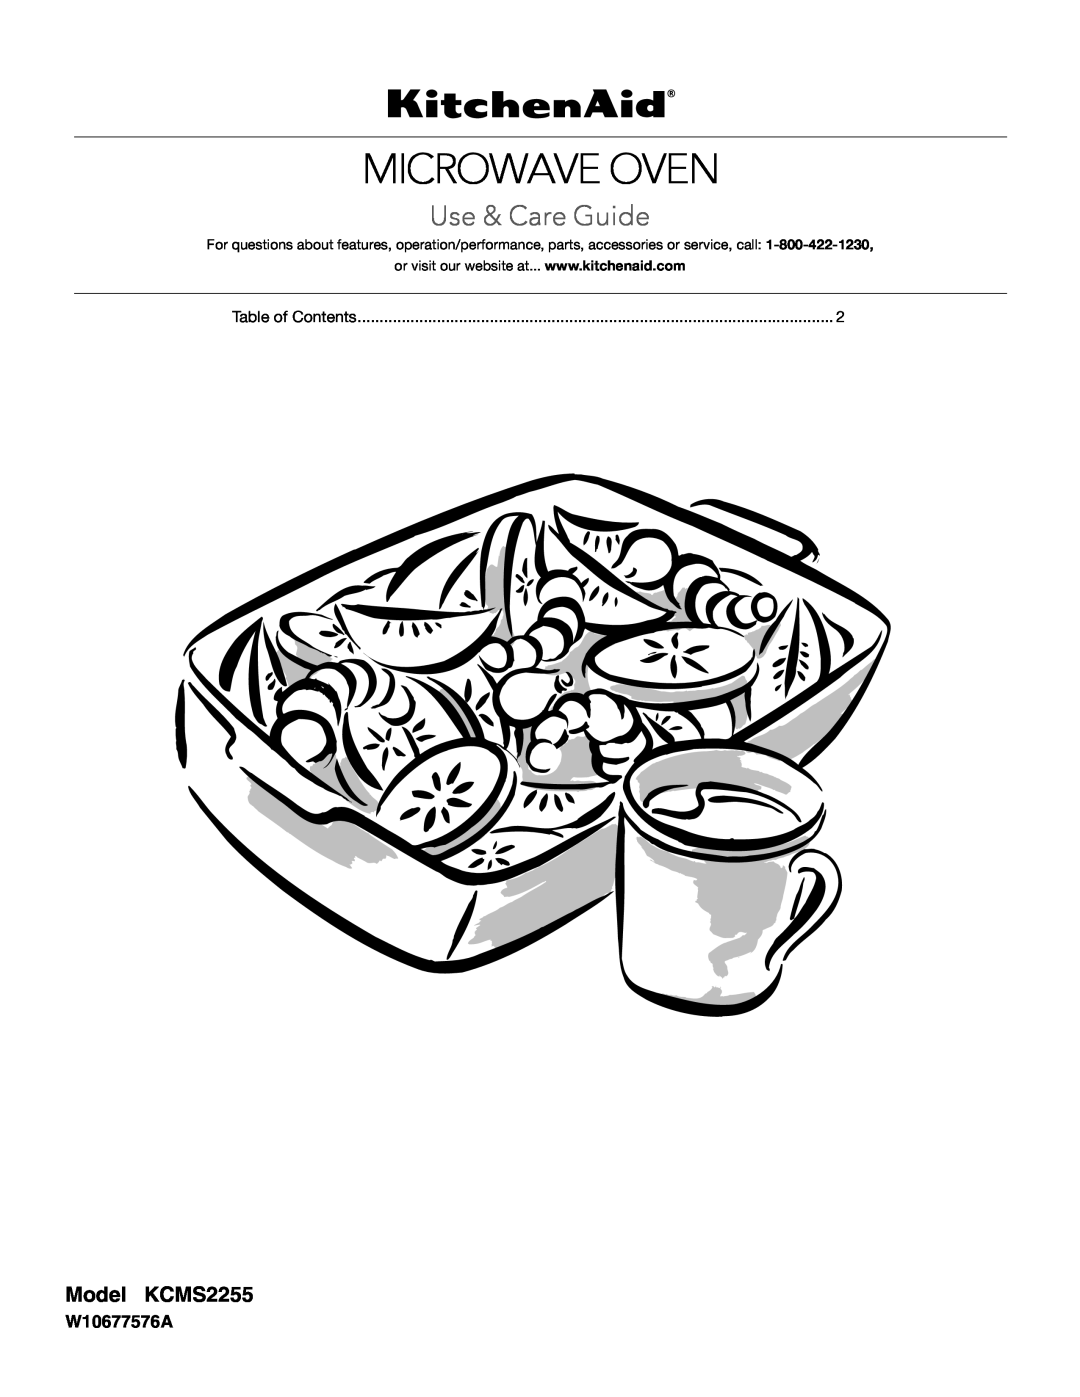 KitchenAid manual Model KCMS2255, Microwave Oven, Use & Care Guide, W10677576A 